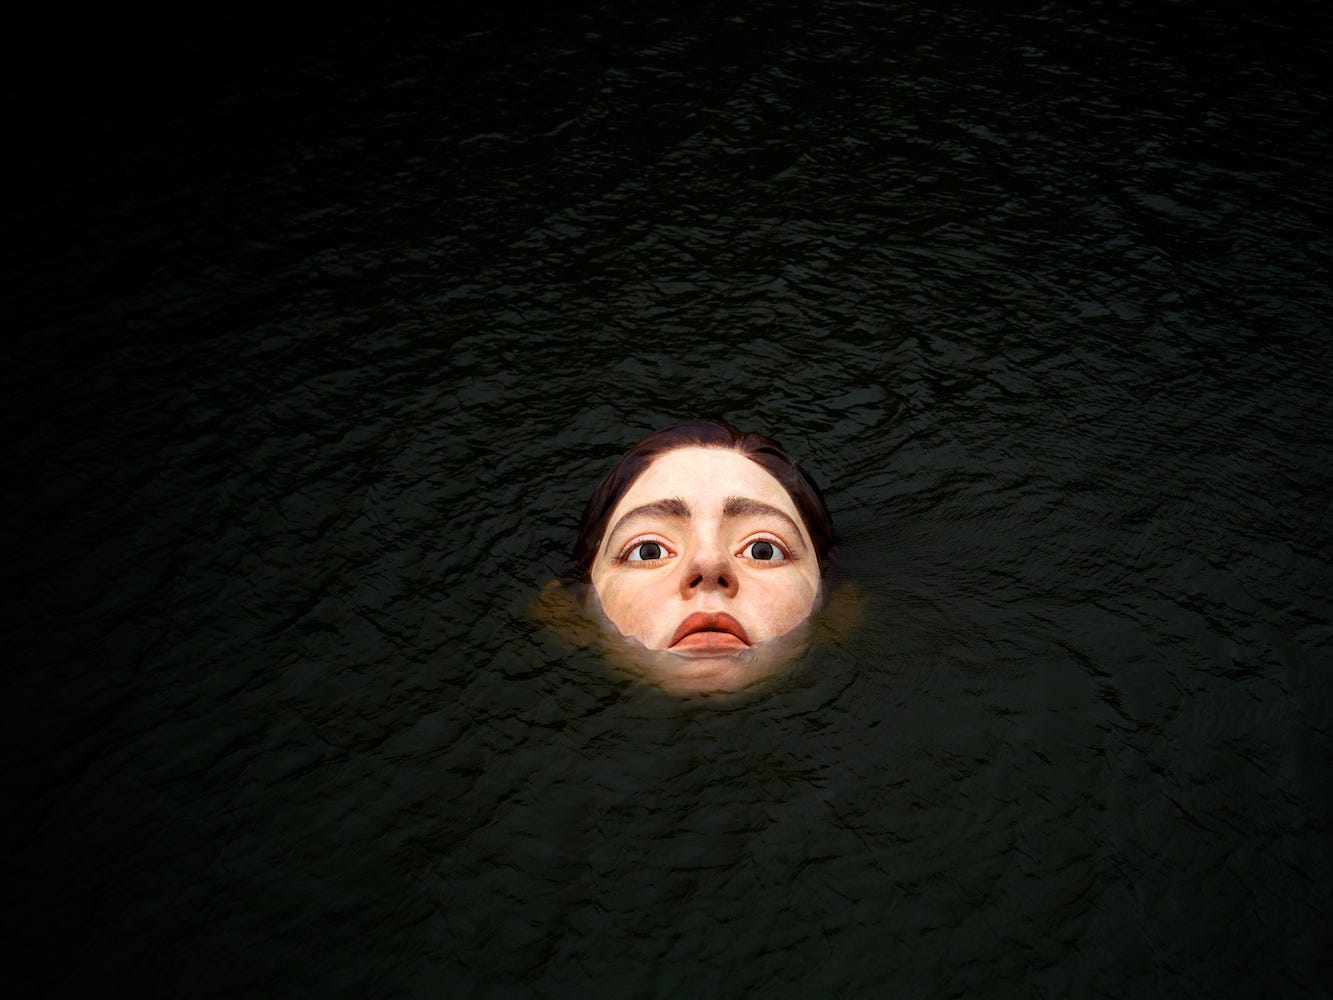 A fiberglass sculpture entitled "Bihar" ("Tomorrow" in Basque), by Mexican hyperrealist artist Ruben Orozco, is submerged in the Nervion river in Bilbao, Spain, September 27, 2021.